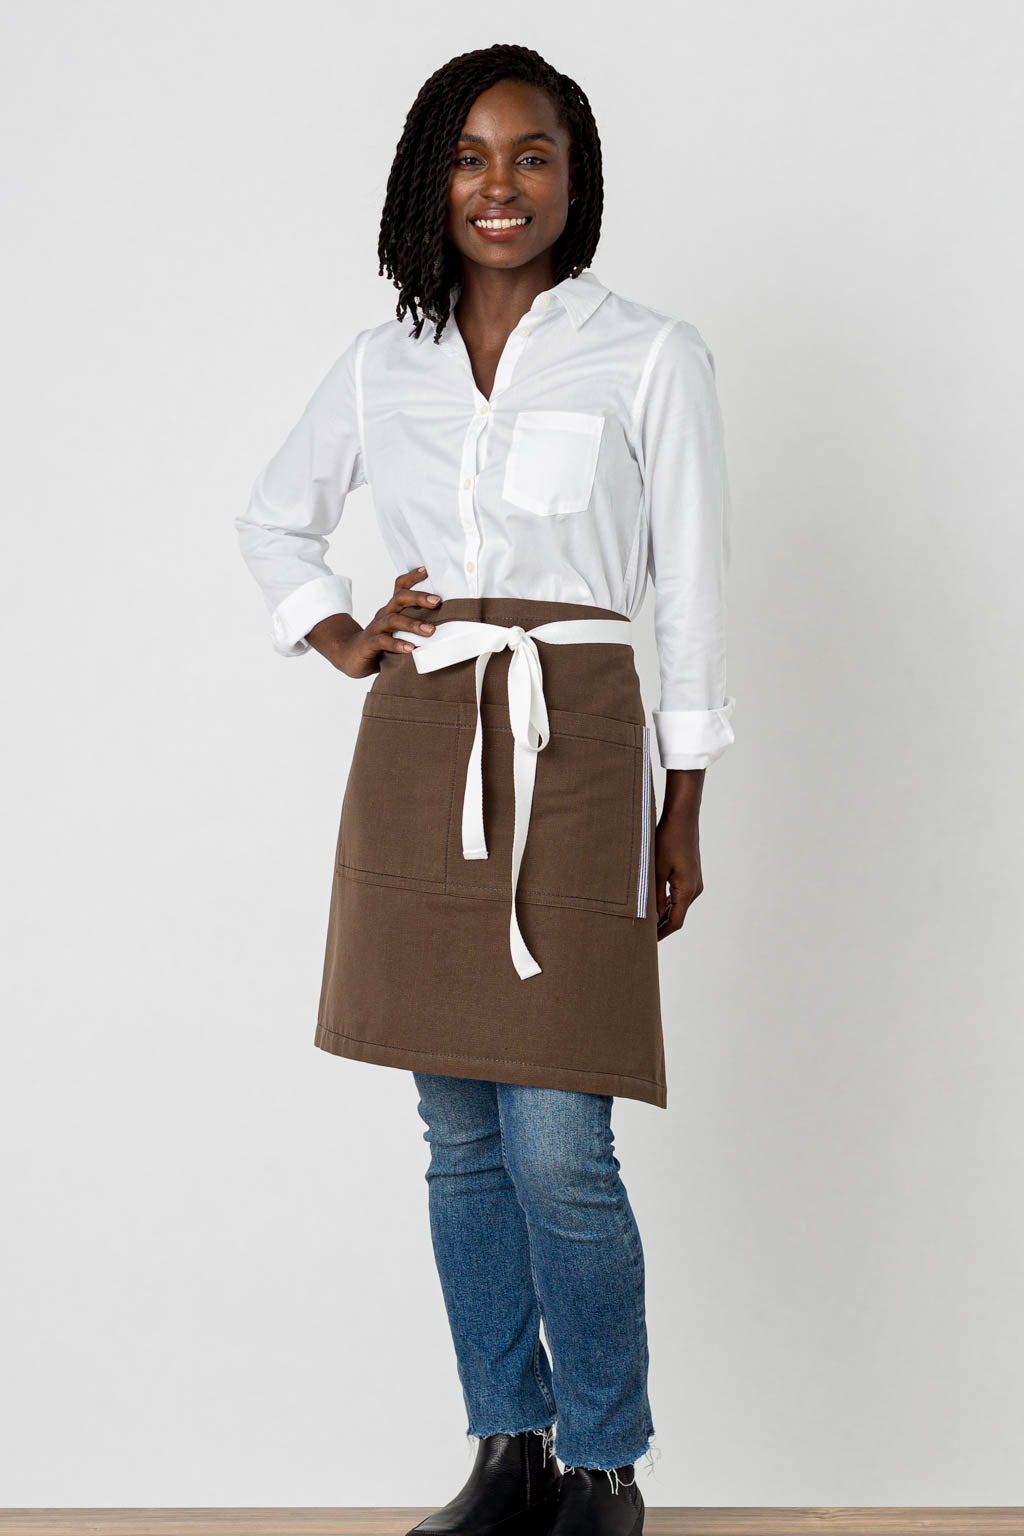 Bistro Middly Apron, 20"L, Dark Brown with White Straps, Men and Women